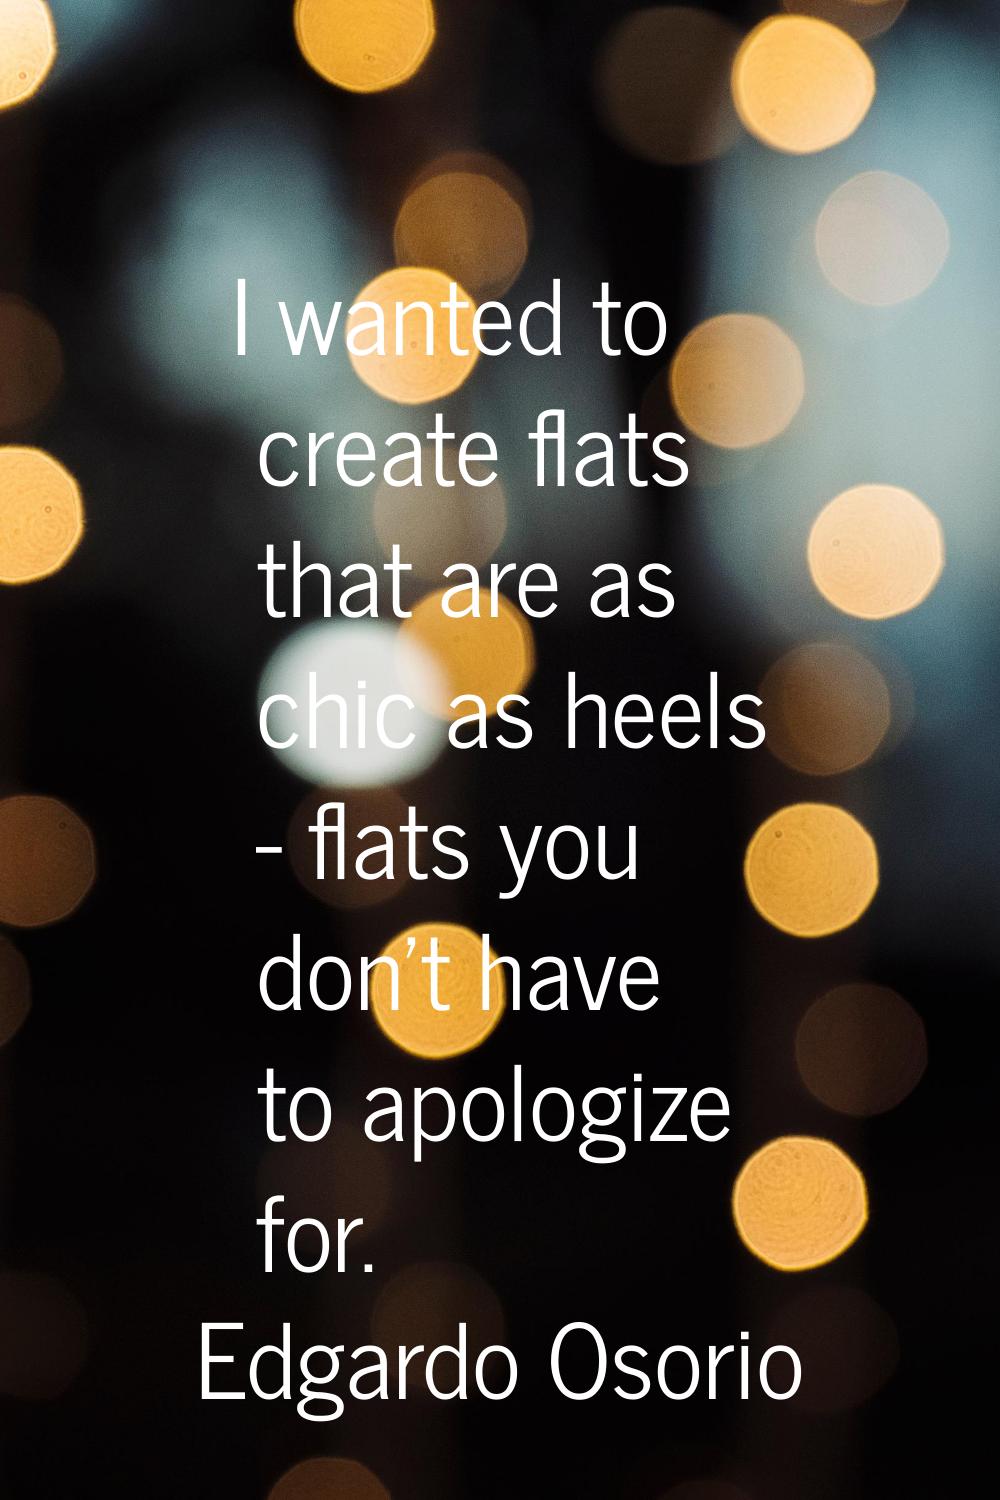 I wanted to create flats that are as chic as heels - flats you don't have to apologize for.